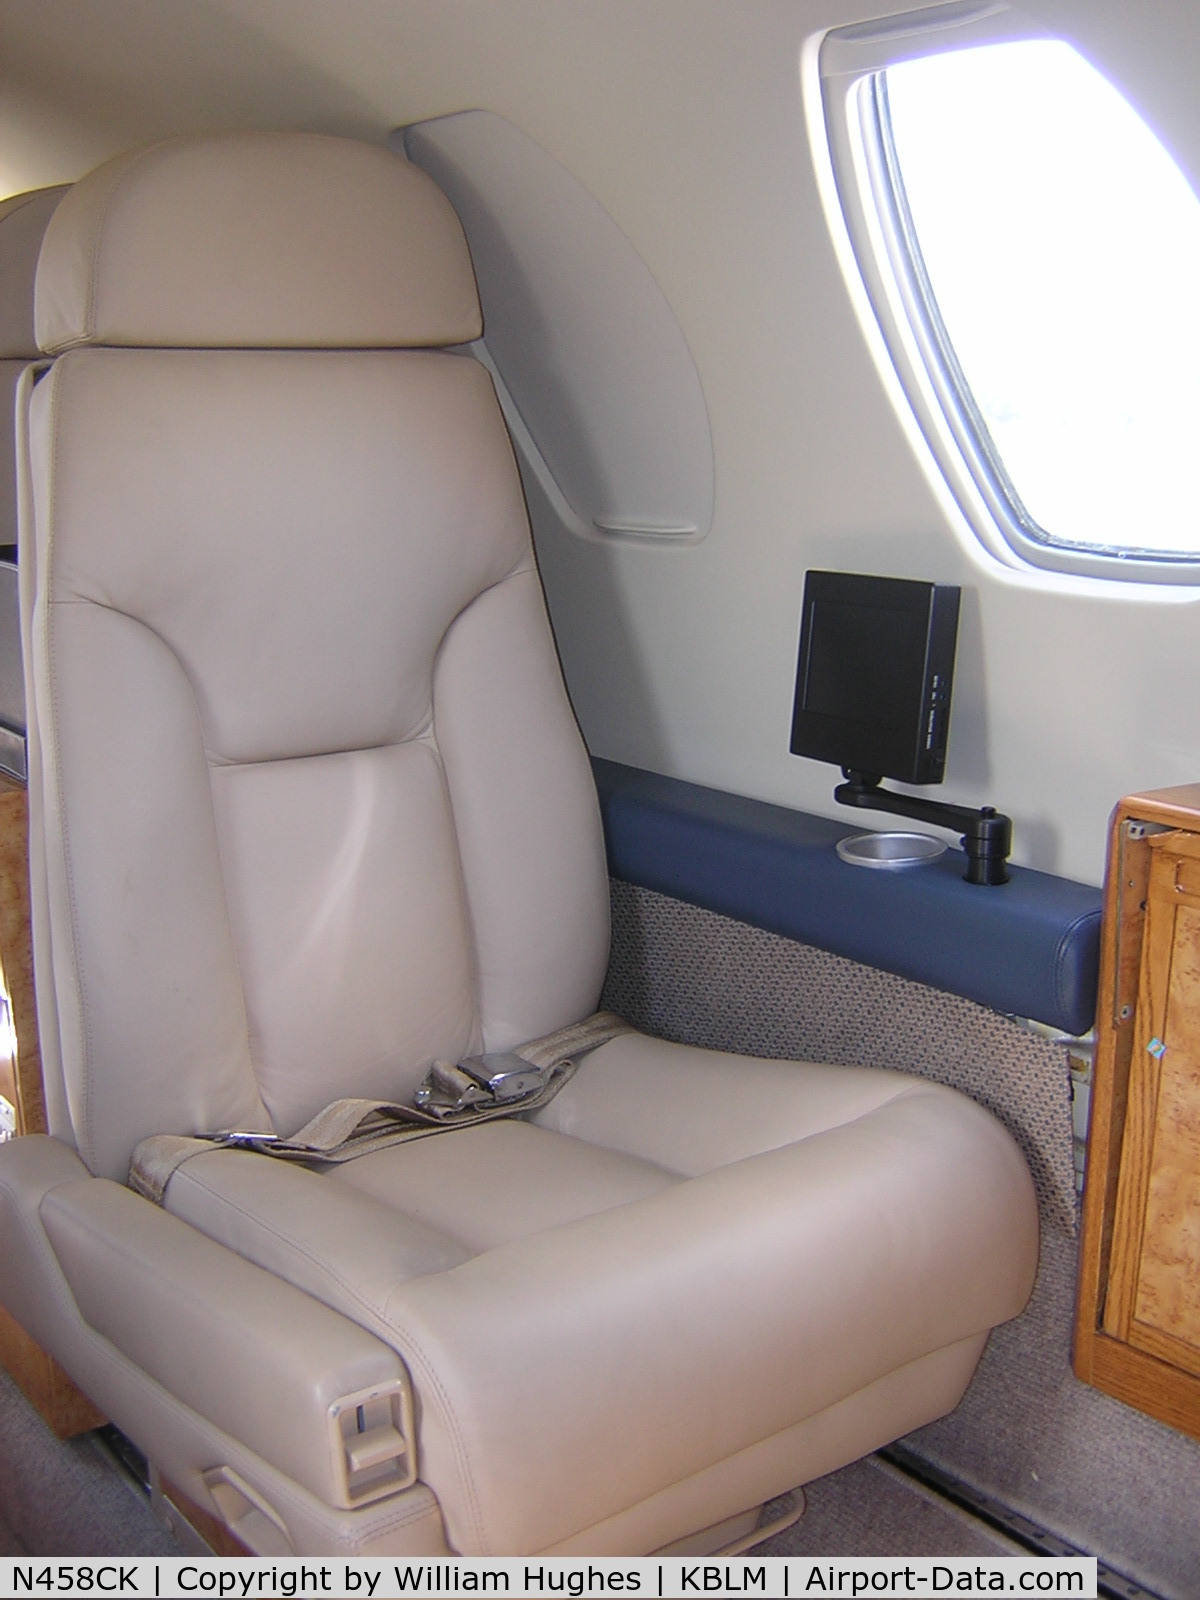 N458CK, Cessna 560 C/N 5600160, brand new seat (my favorite spot in the plane)